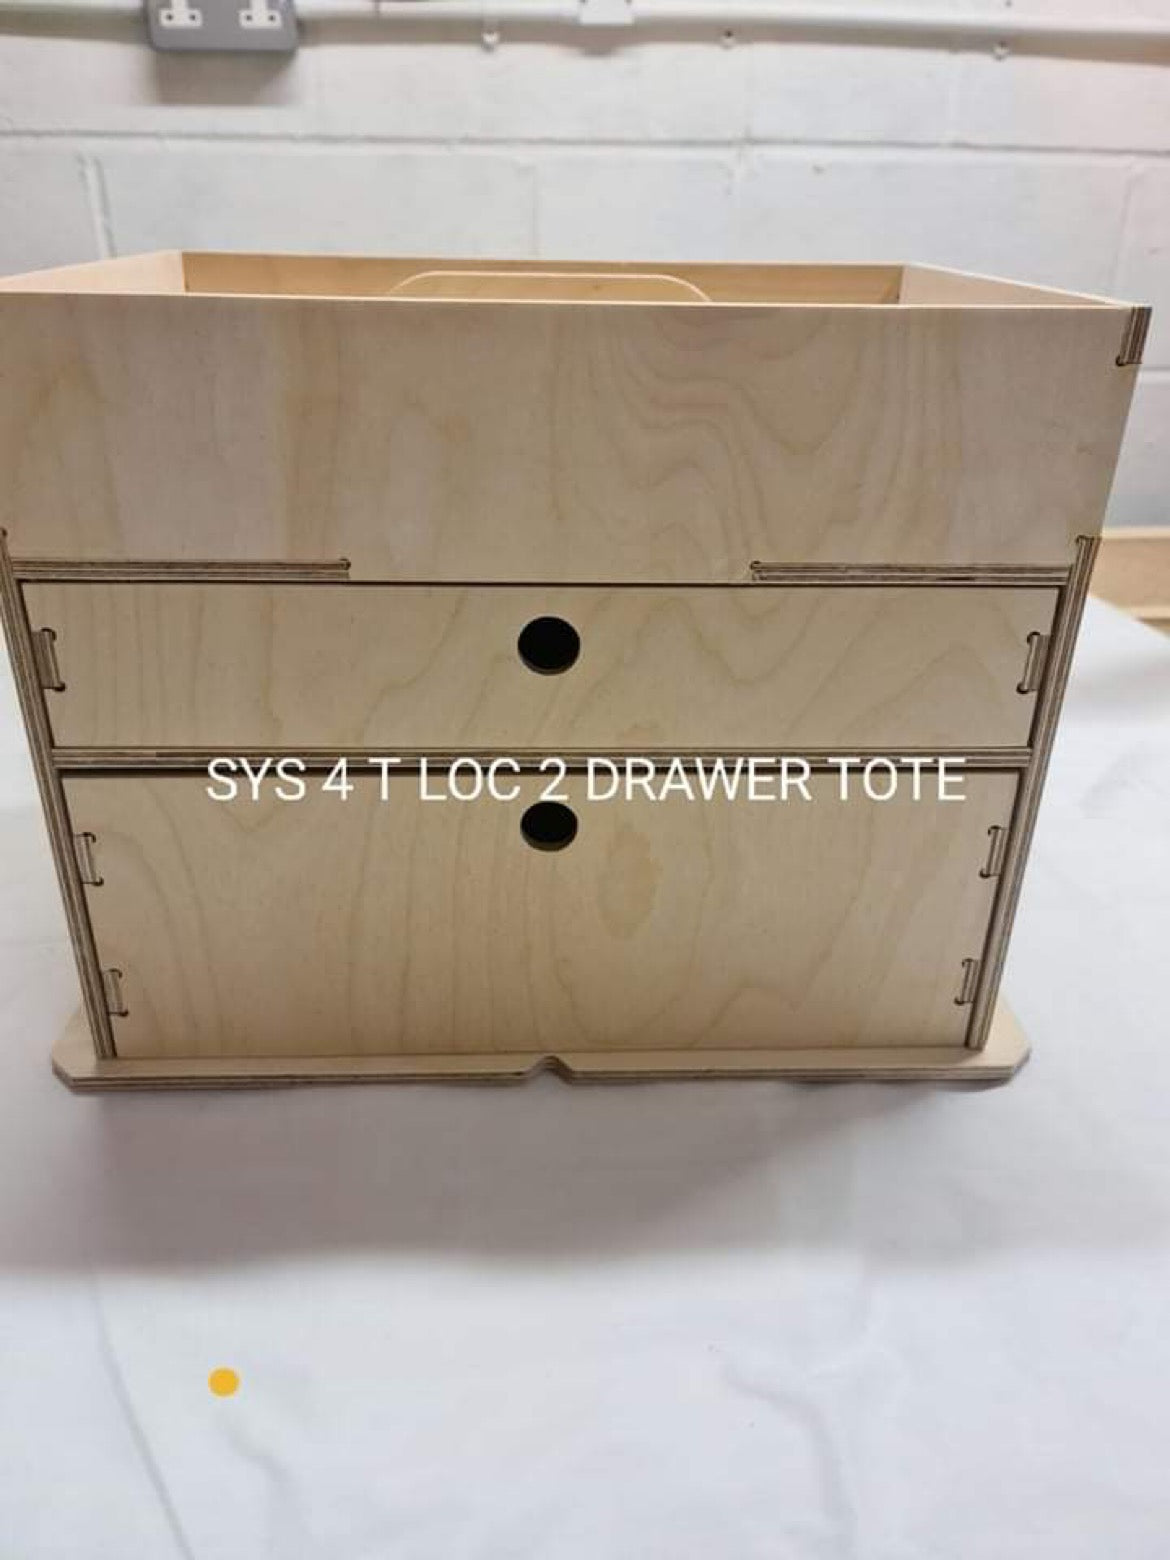 SYS 4 T Loc Tote 2 Drawer